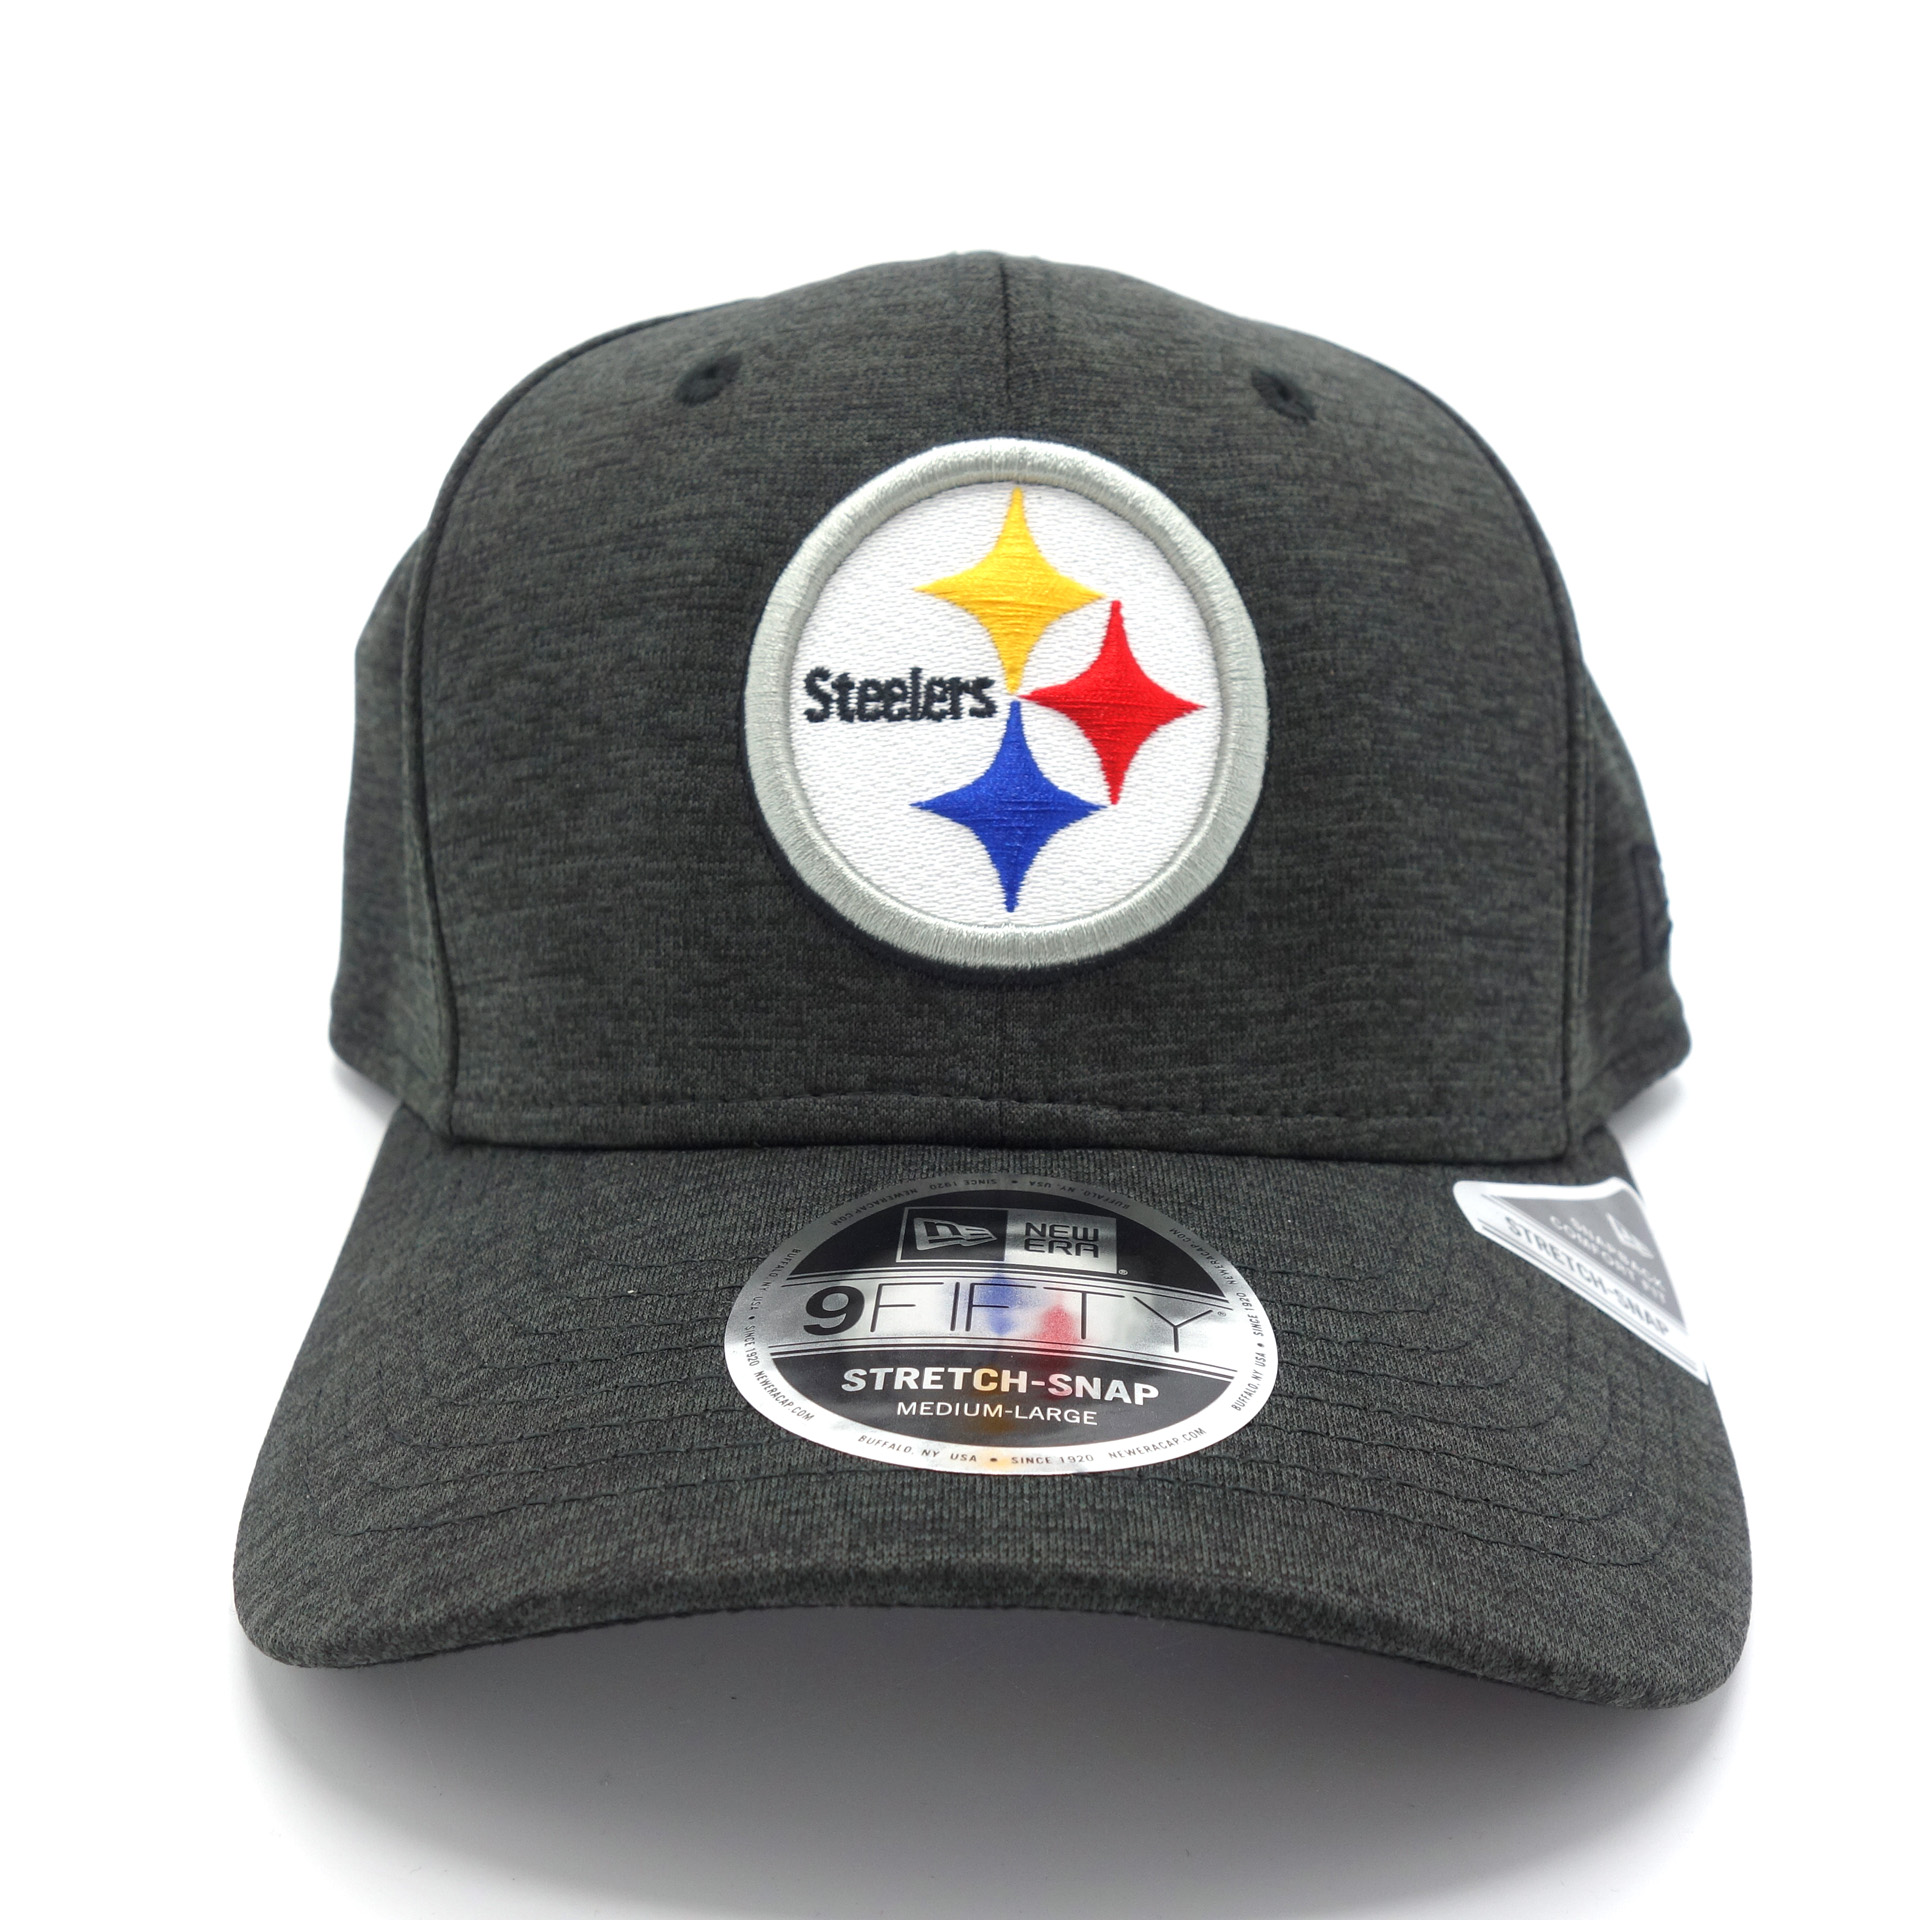 NFL New Era Stretch-Snap 9Fifty Pittsburgh Steelers